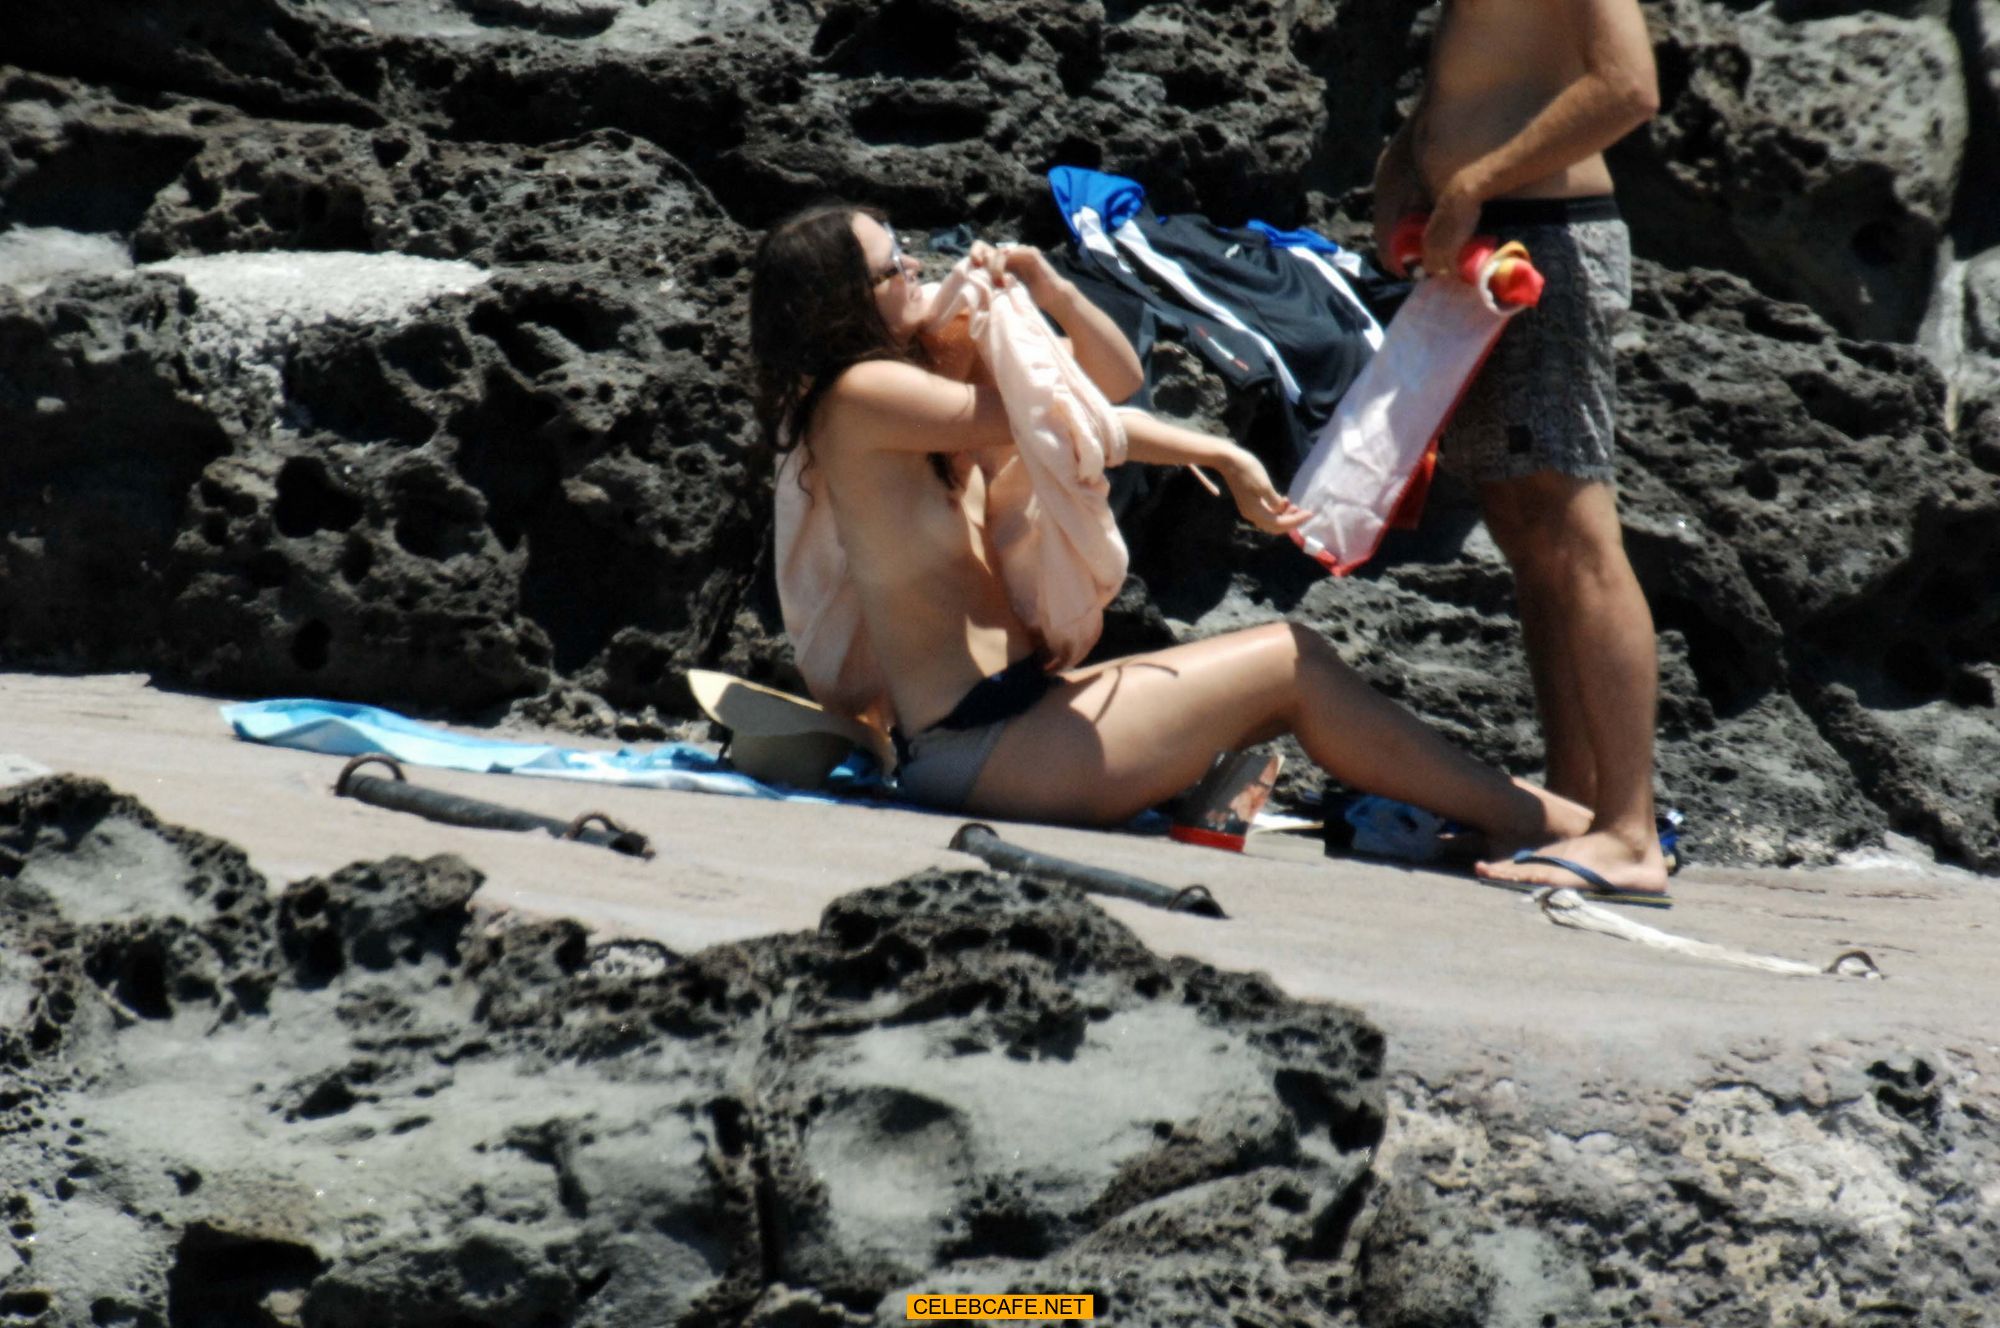 keira_knightley_on_the_beach_in_pantelleria_some_topless_62918_24.jpg